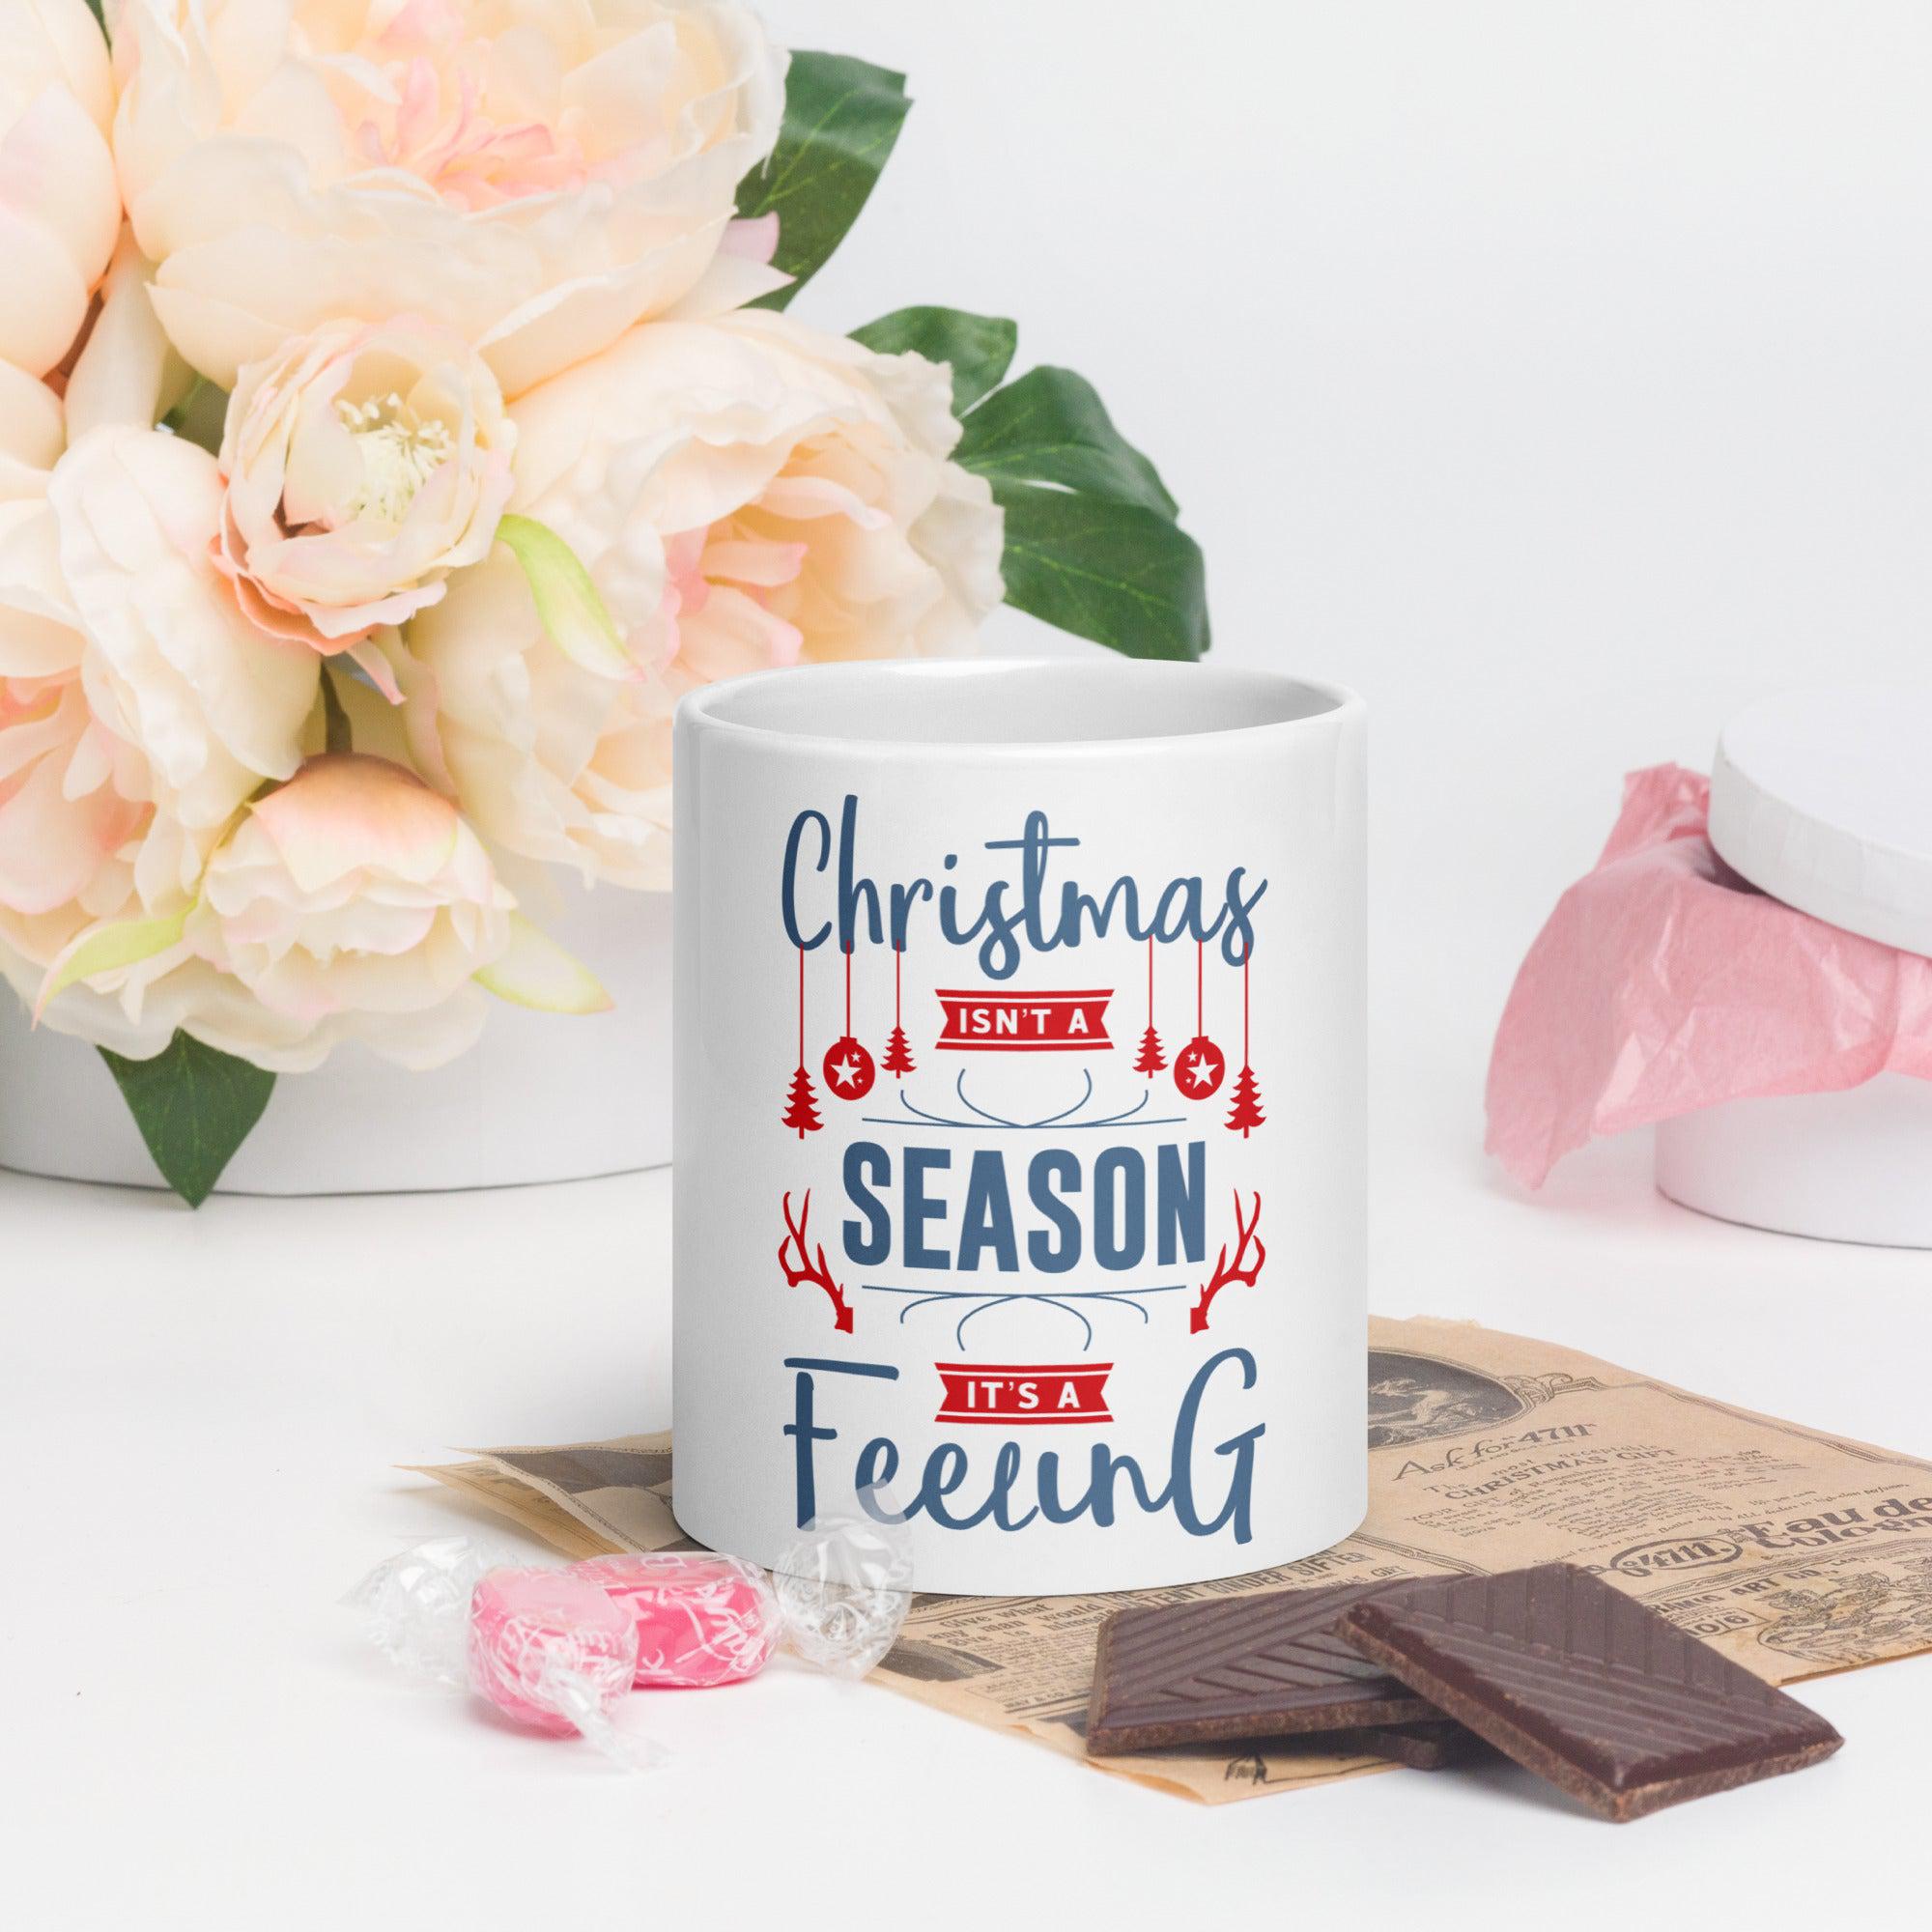 Warm Wishes in Every Sip: Experience the Festive Spirit with Our White Glossy Mug - 'Christmas Isn't a Season, It's a Feeling